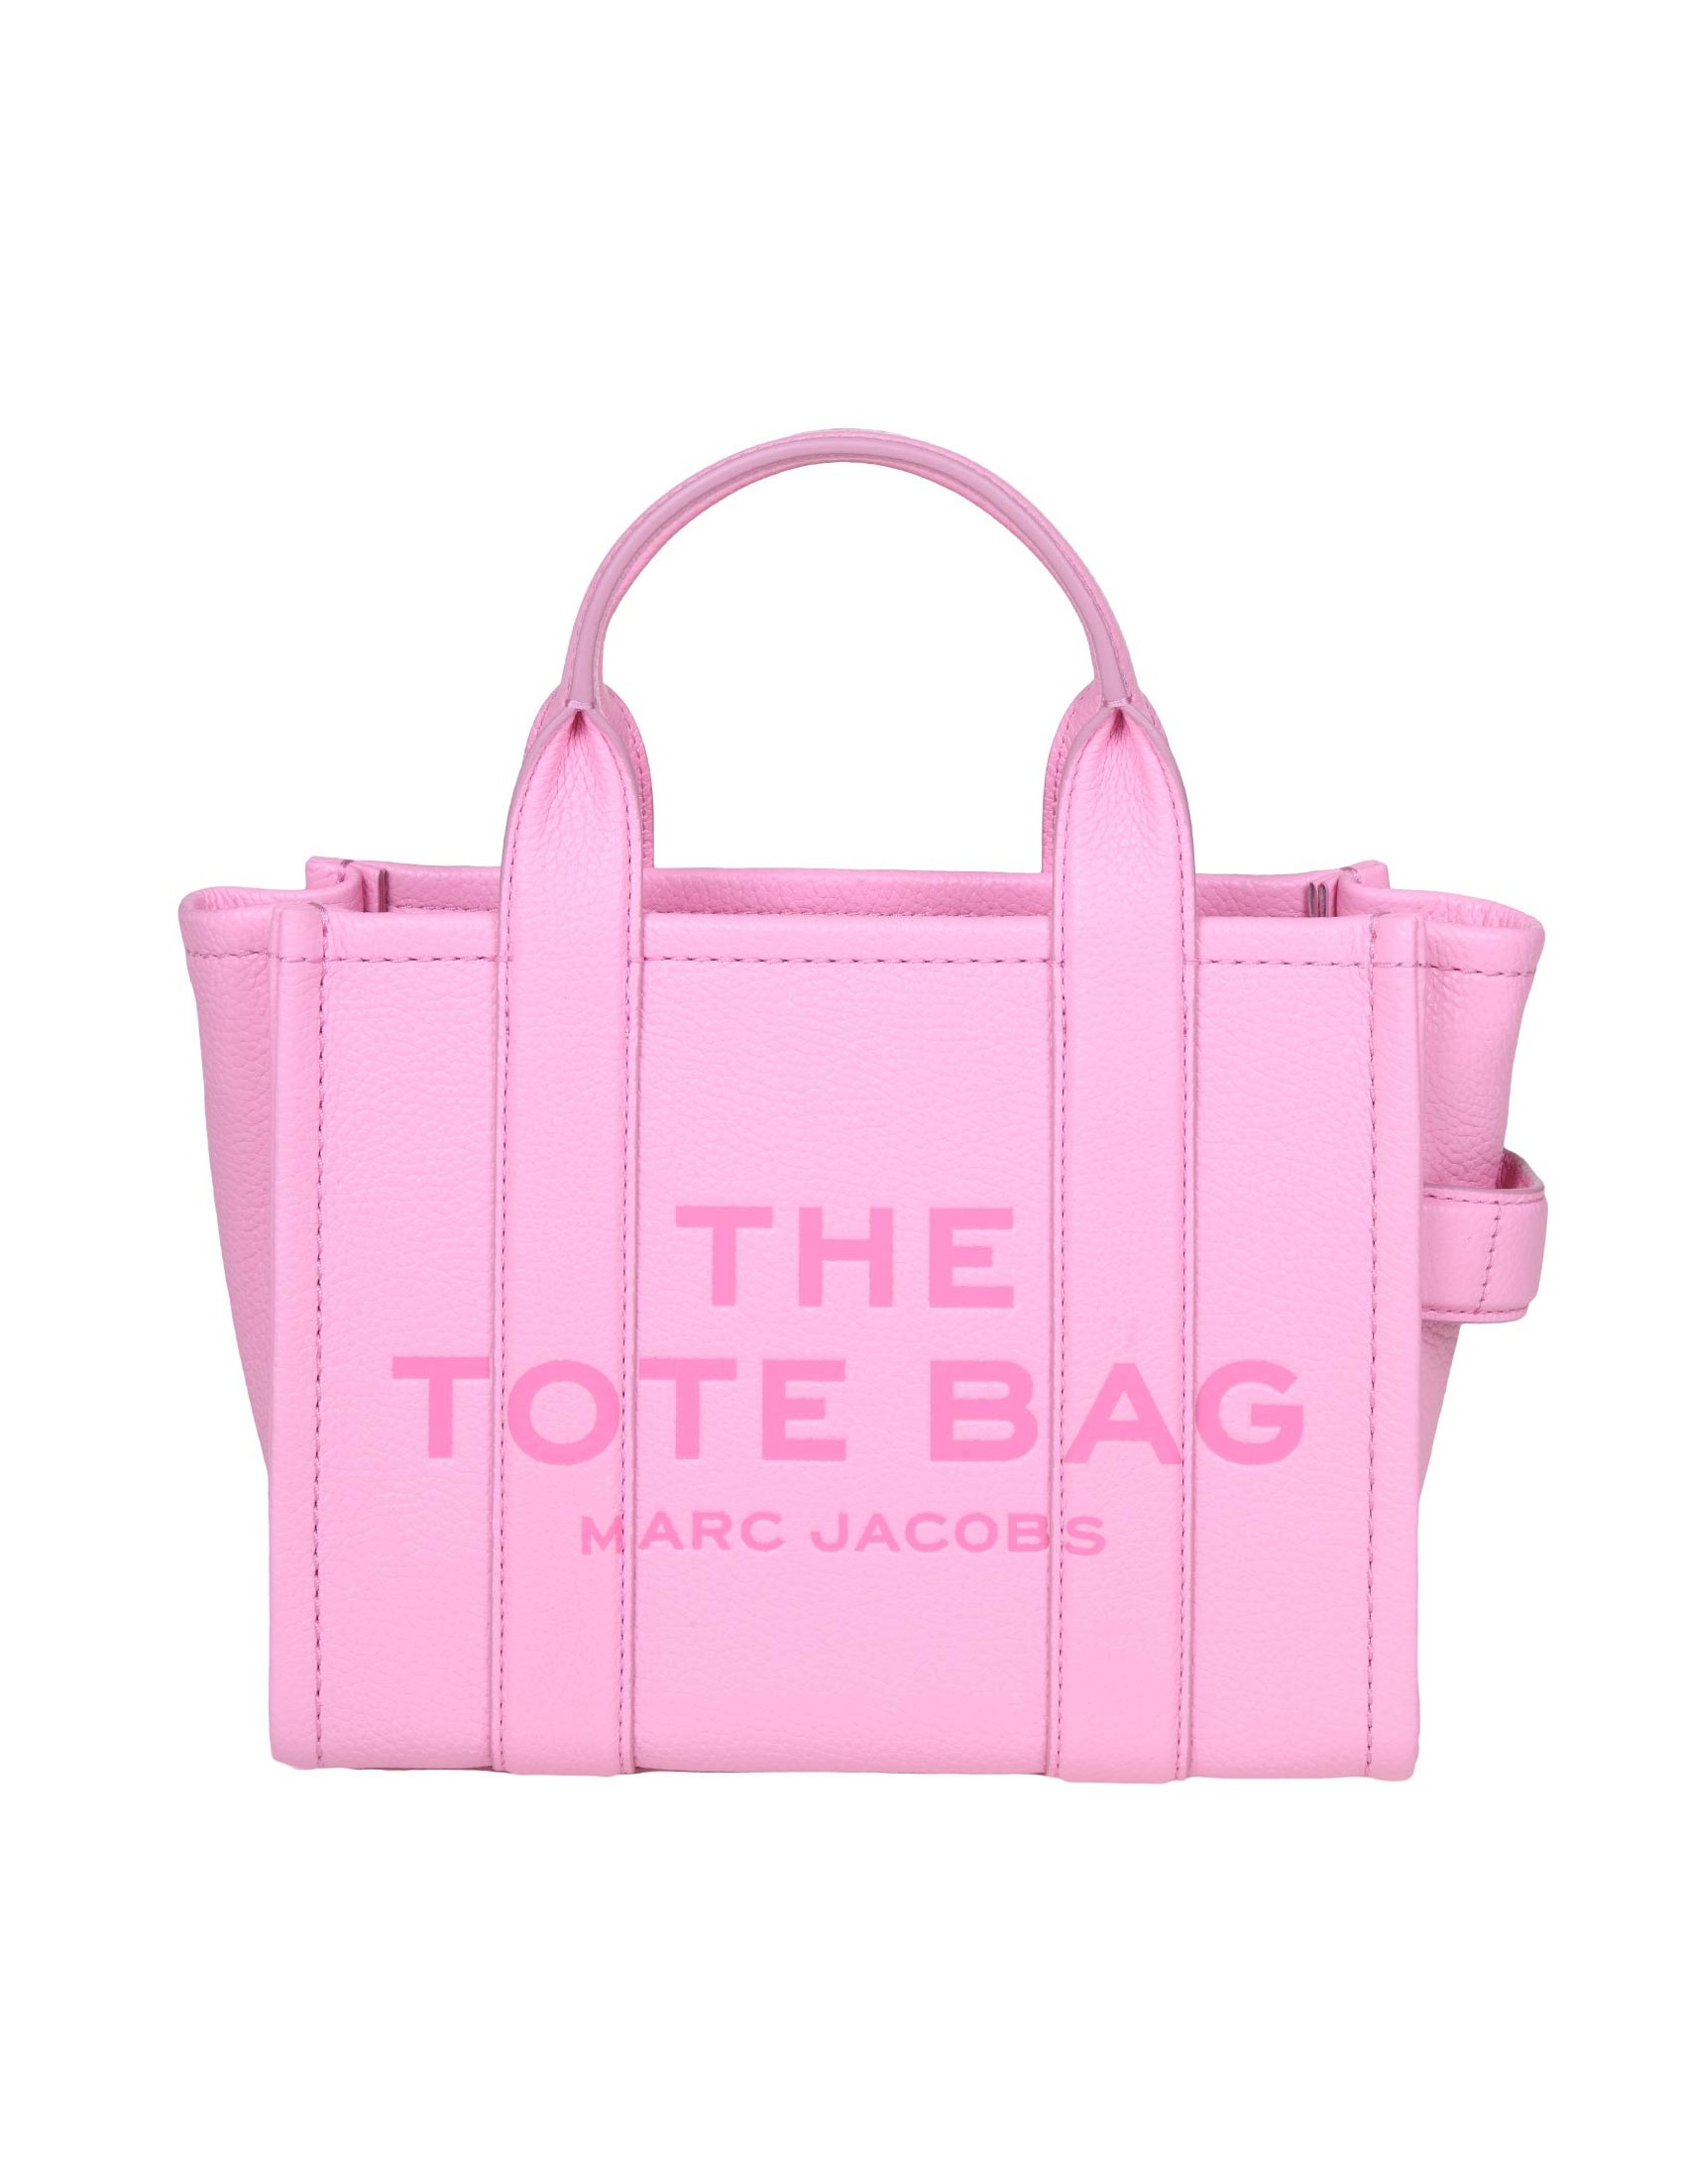 MARC JACOBS THE SMALL LEATHER TOTE